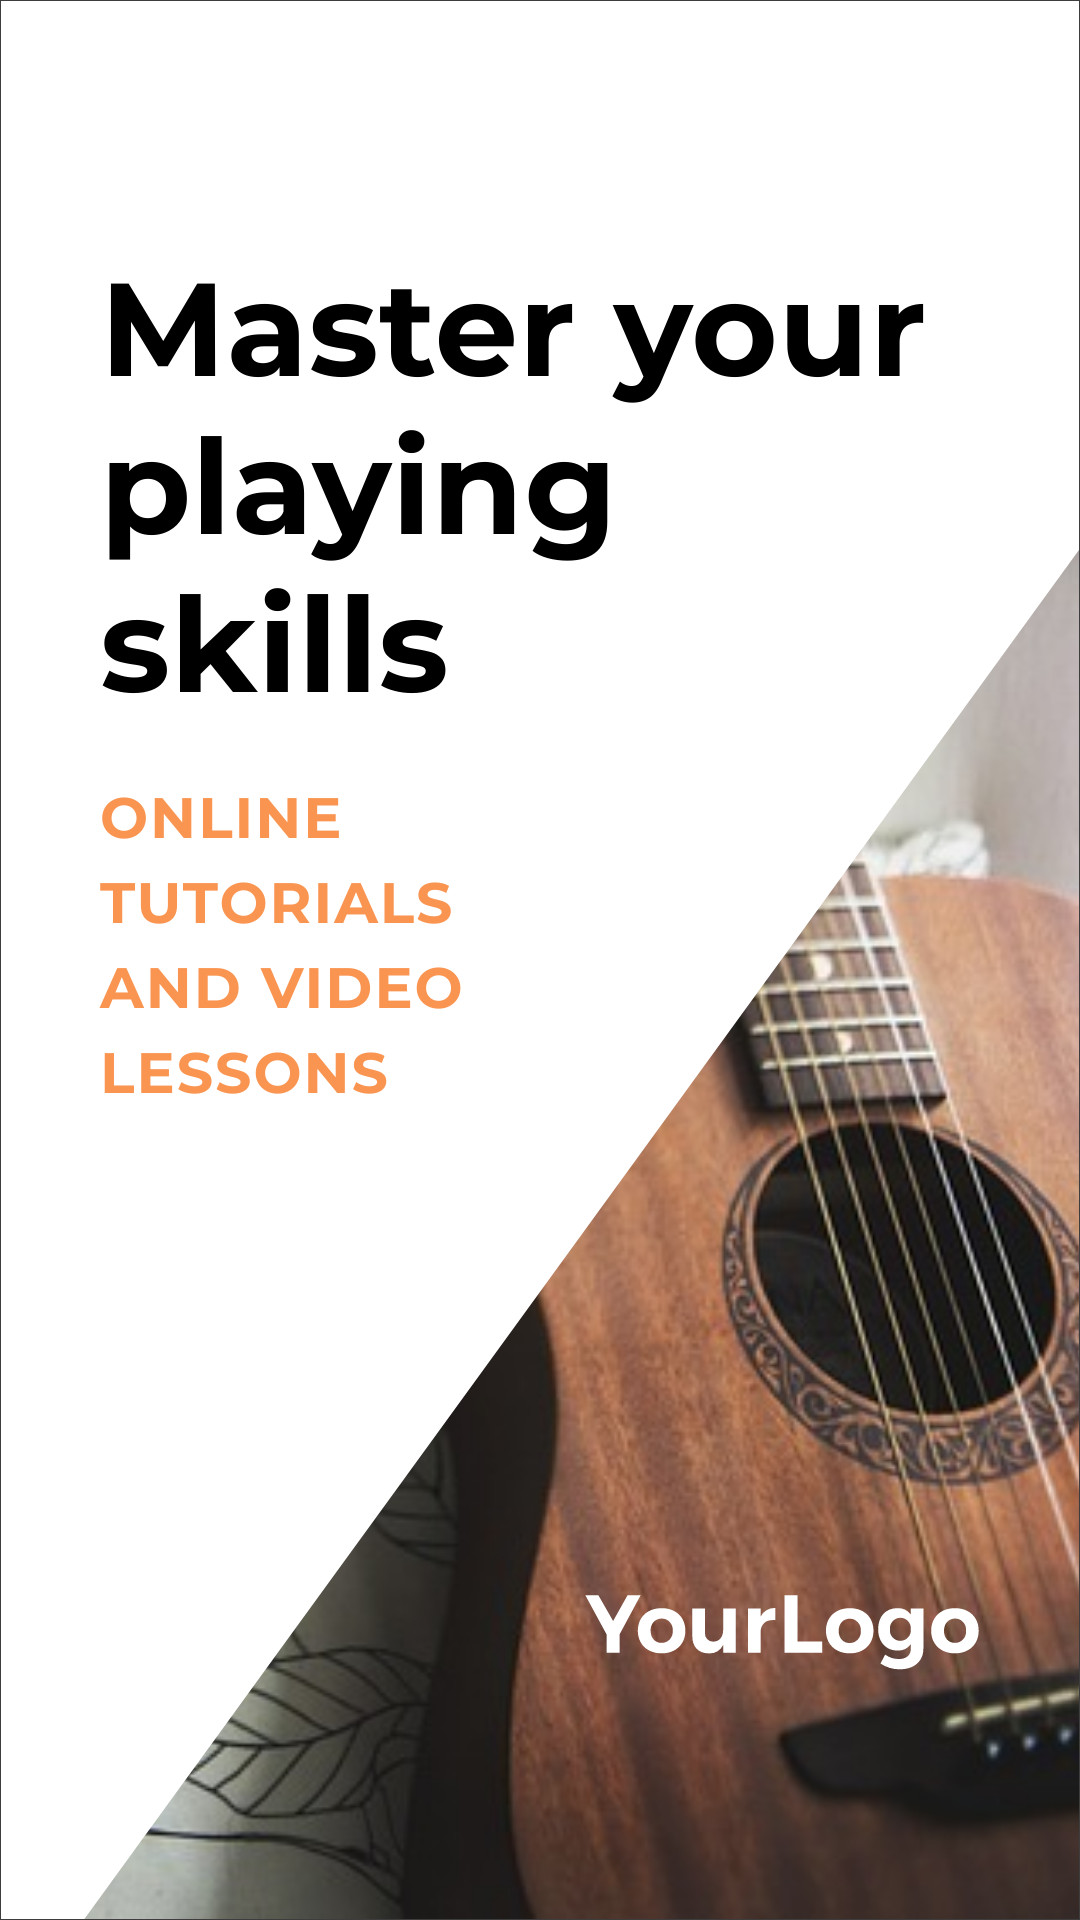 Master Your Playing Skills Online Tutorials Inline Rectangle 300x250